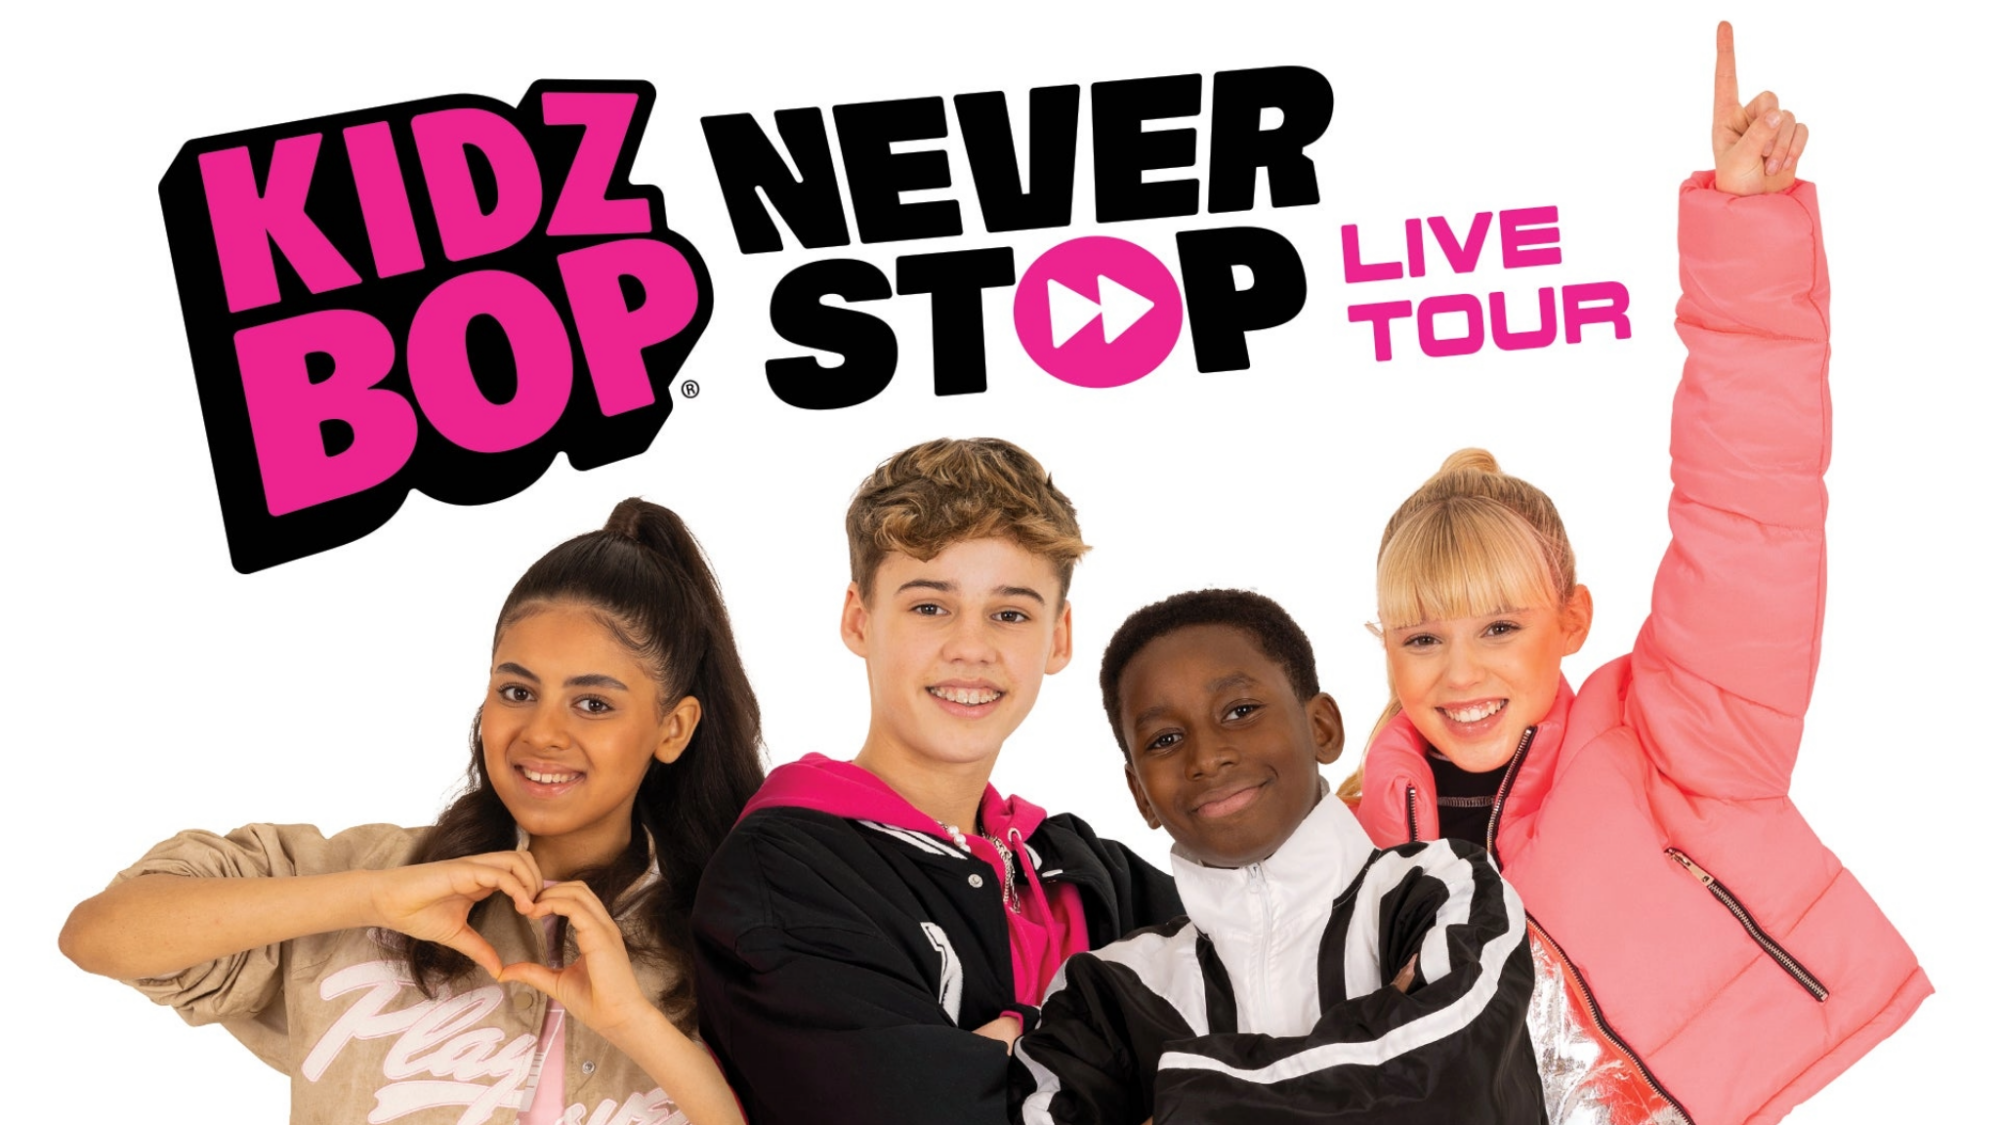 Image name KIDZ BOP Never Stop Live Tour at Sheffield City Hall Oval Hall Sheffield the 17 image from the post Events in Yorkshire.com.